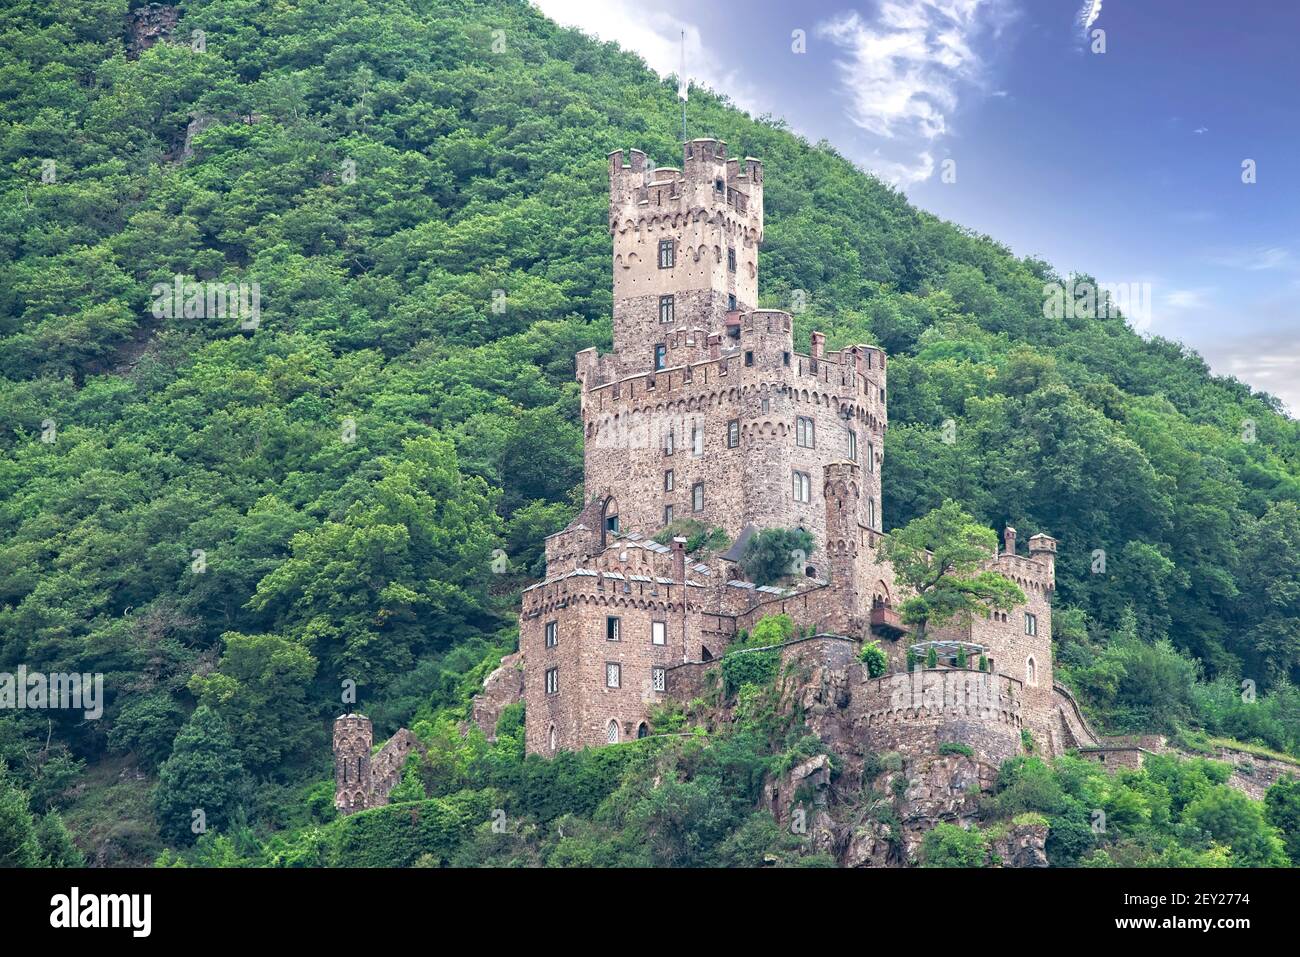 Old castle on the mountainside of the Rhine River, Germany Stock Photo